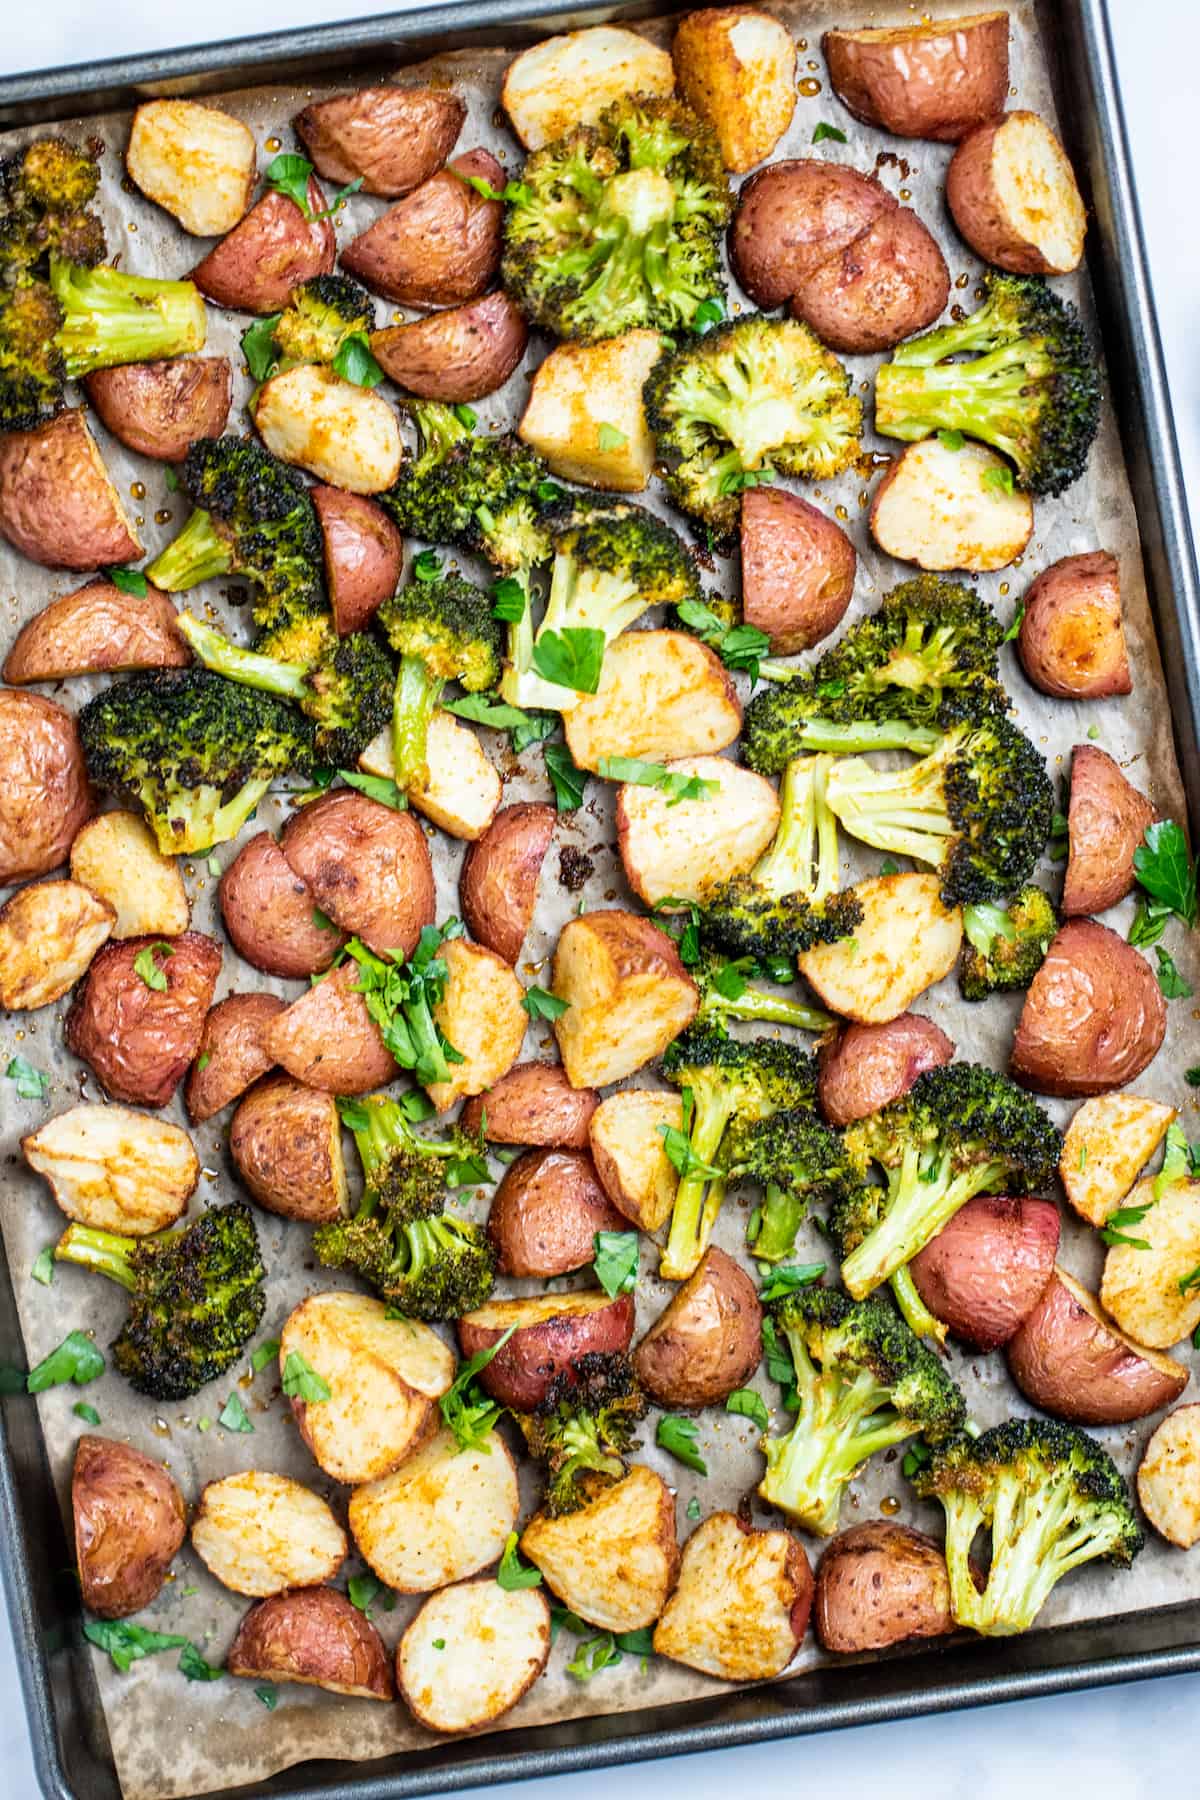 Roasted potatoes and broccoli on a sheet pan with parchment paper.